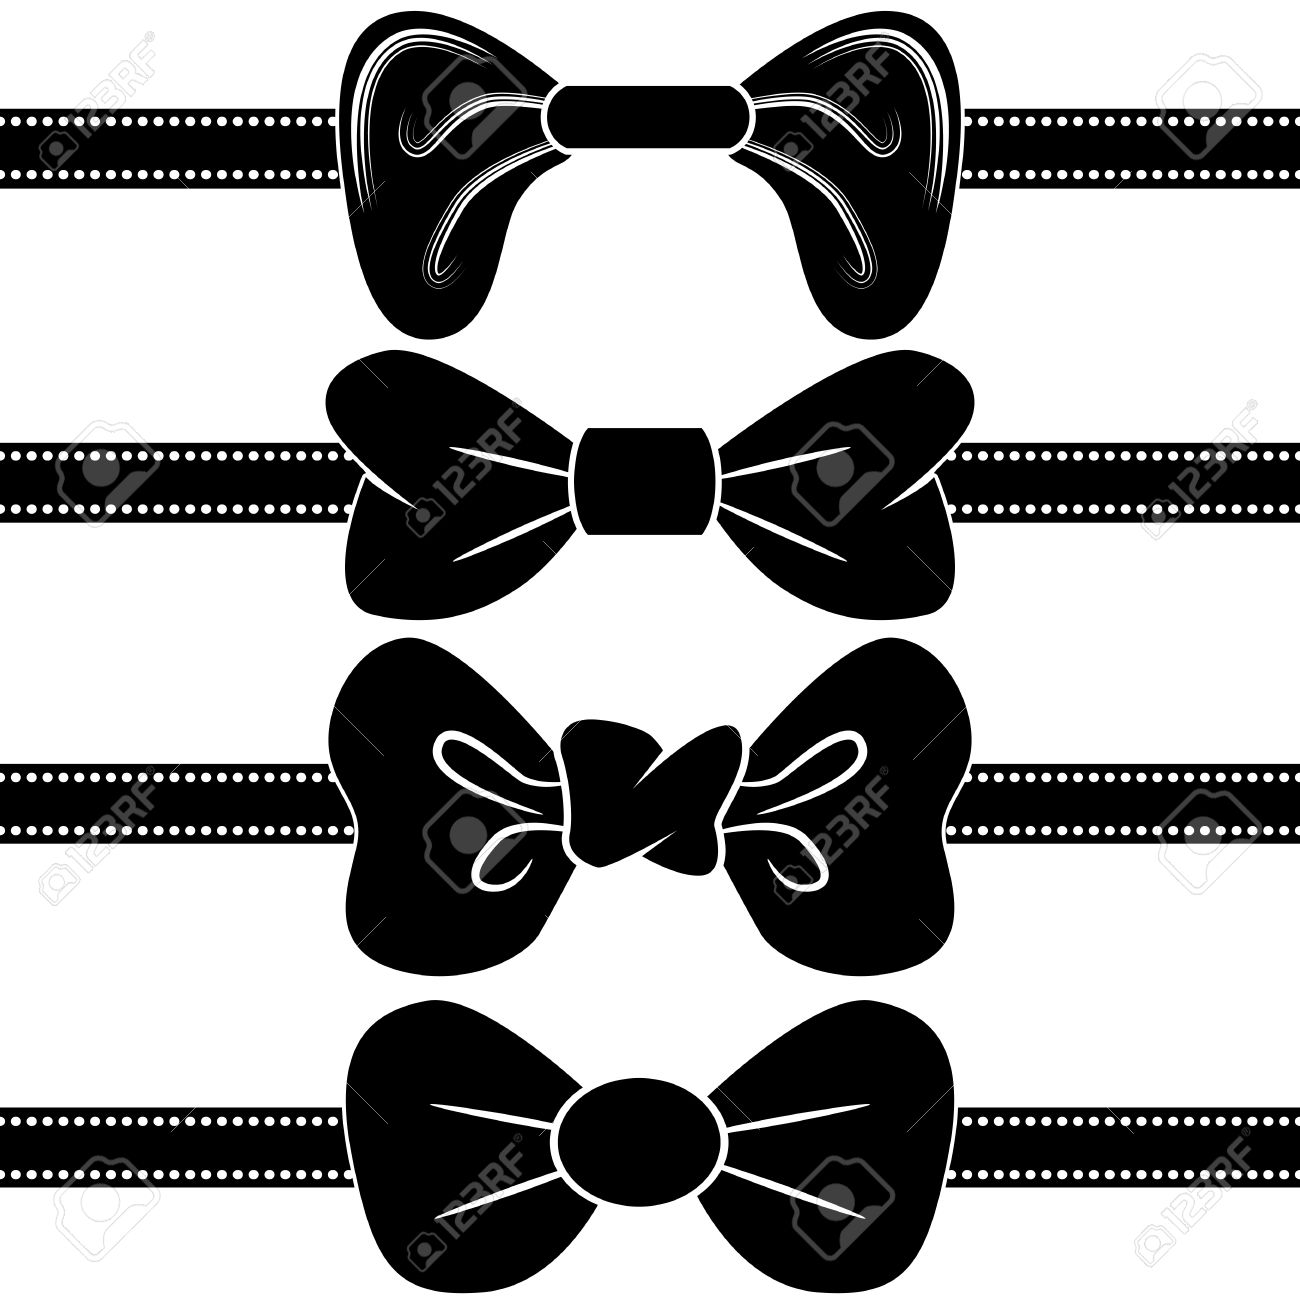 Bow tie pencil and. Bowtie clipart border